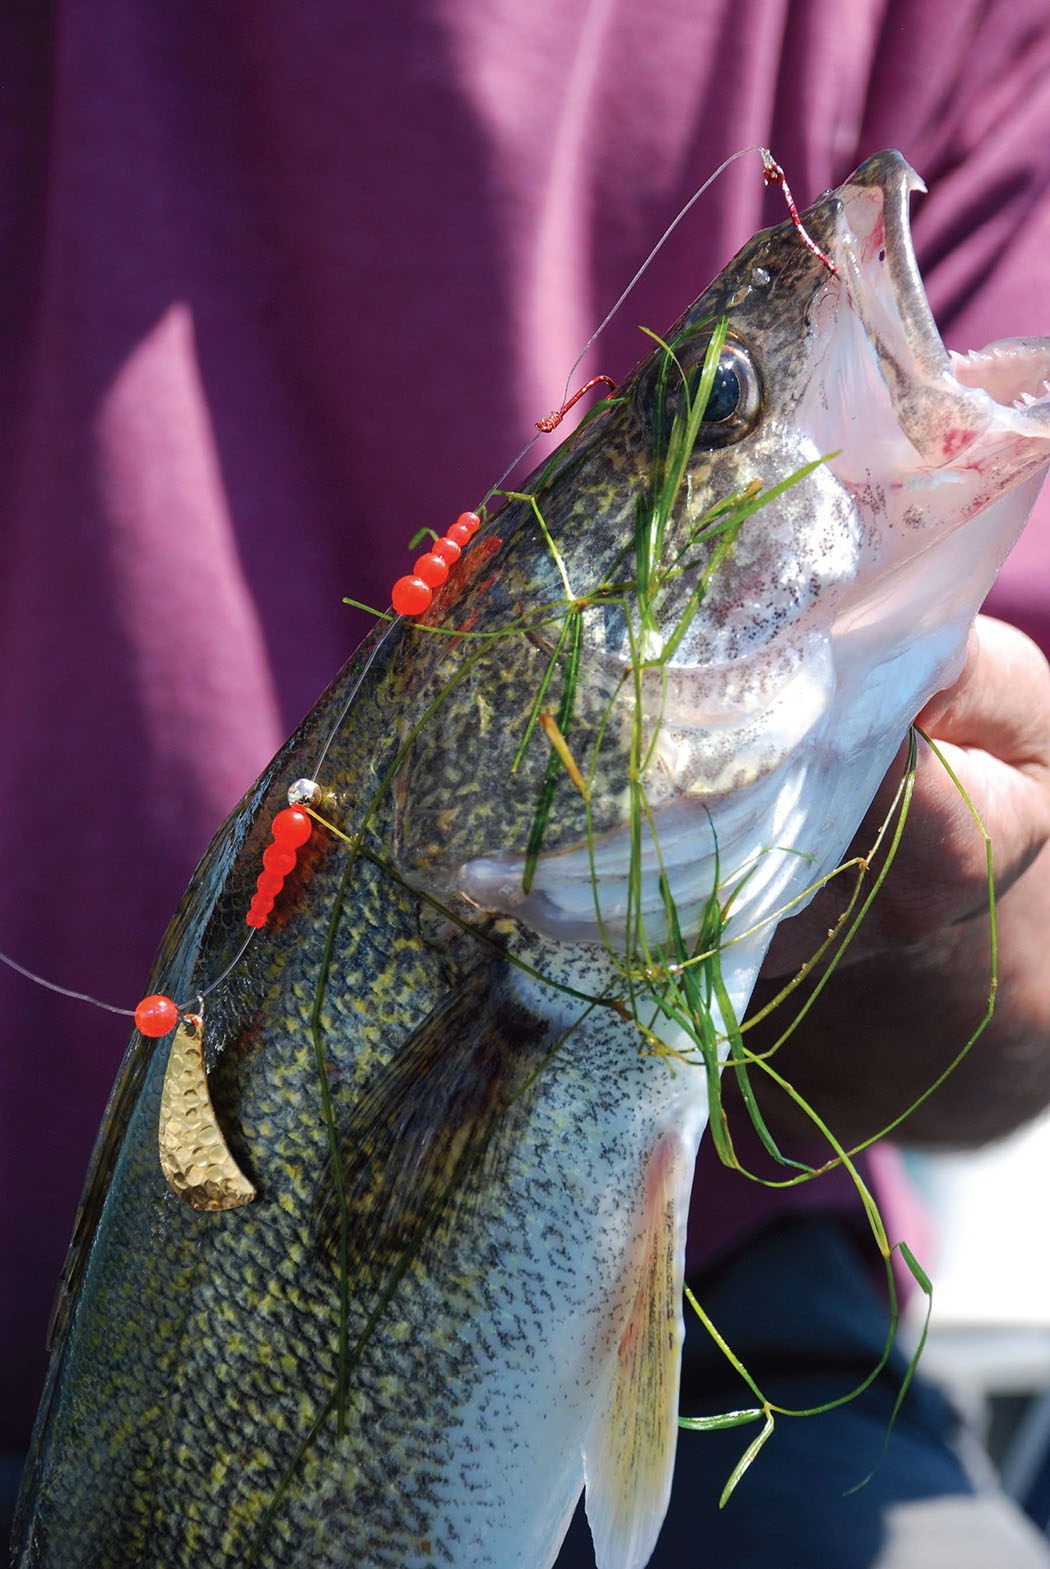 Can Plastic Lures Rival Live Bait for Ice Fishing Success? - Game & Fish